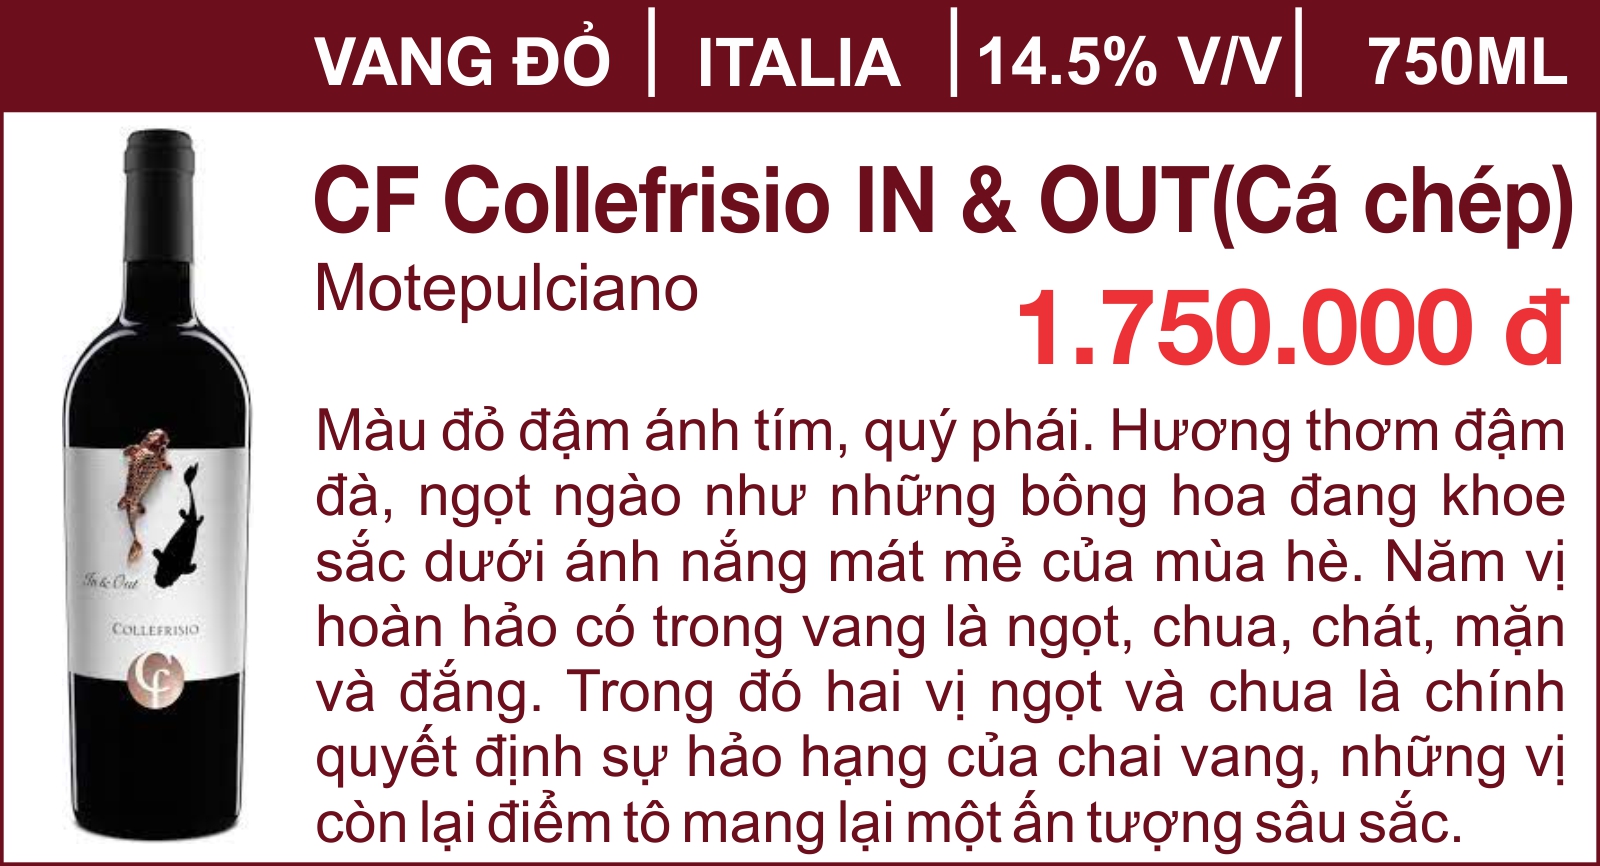 CF Collefrisio IN & OUT-Cá chép